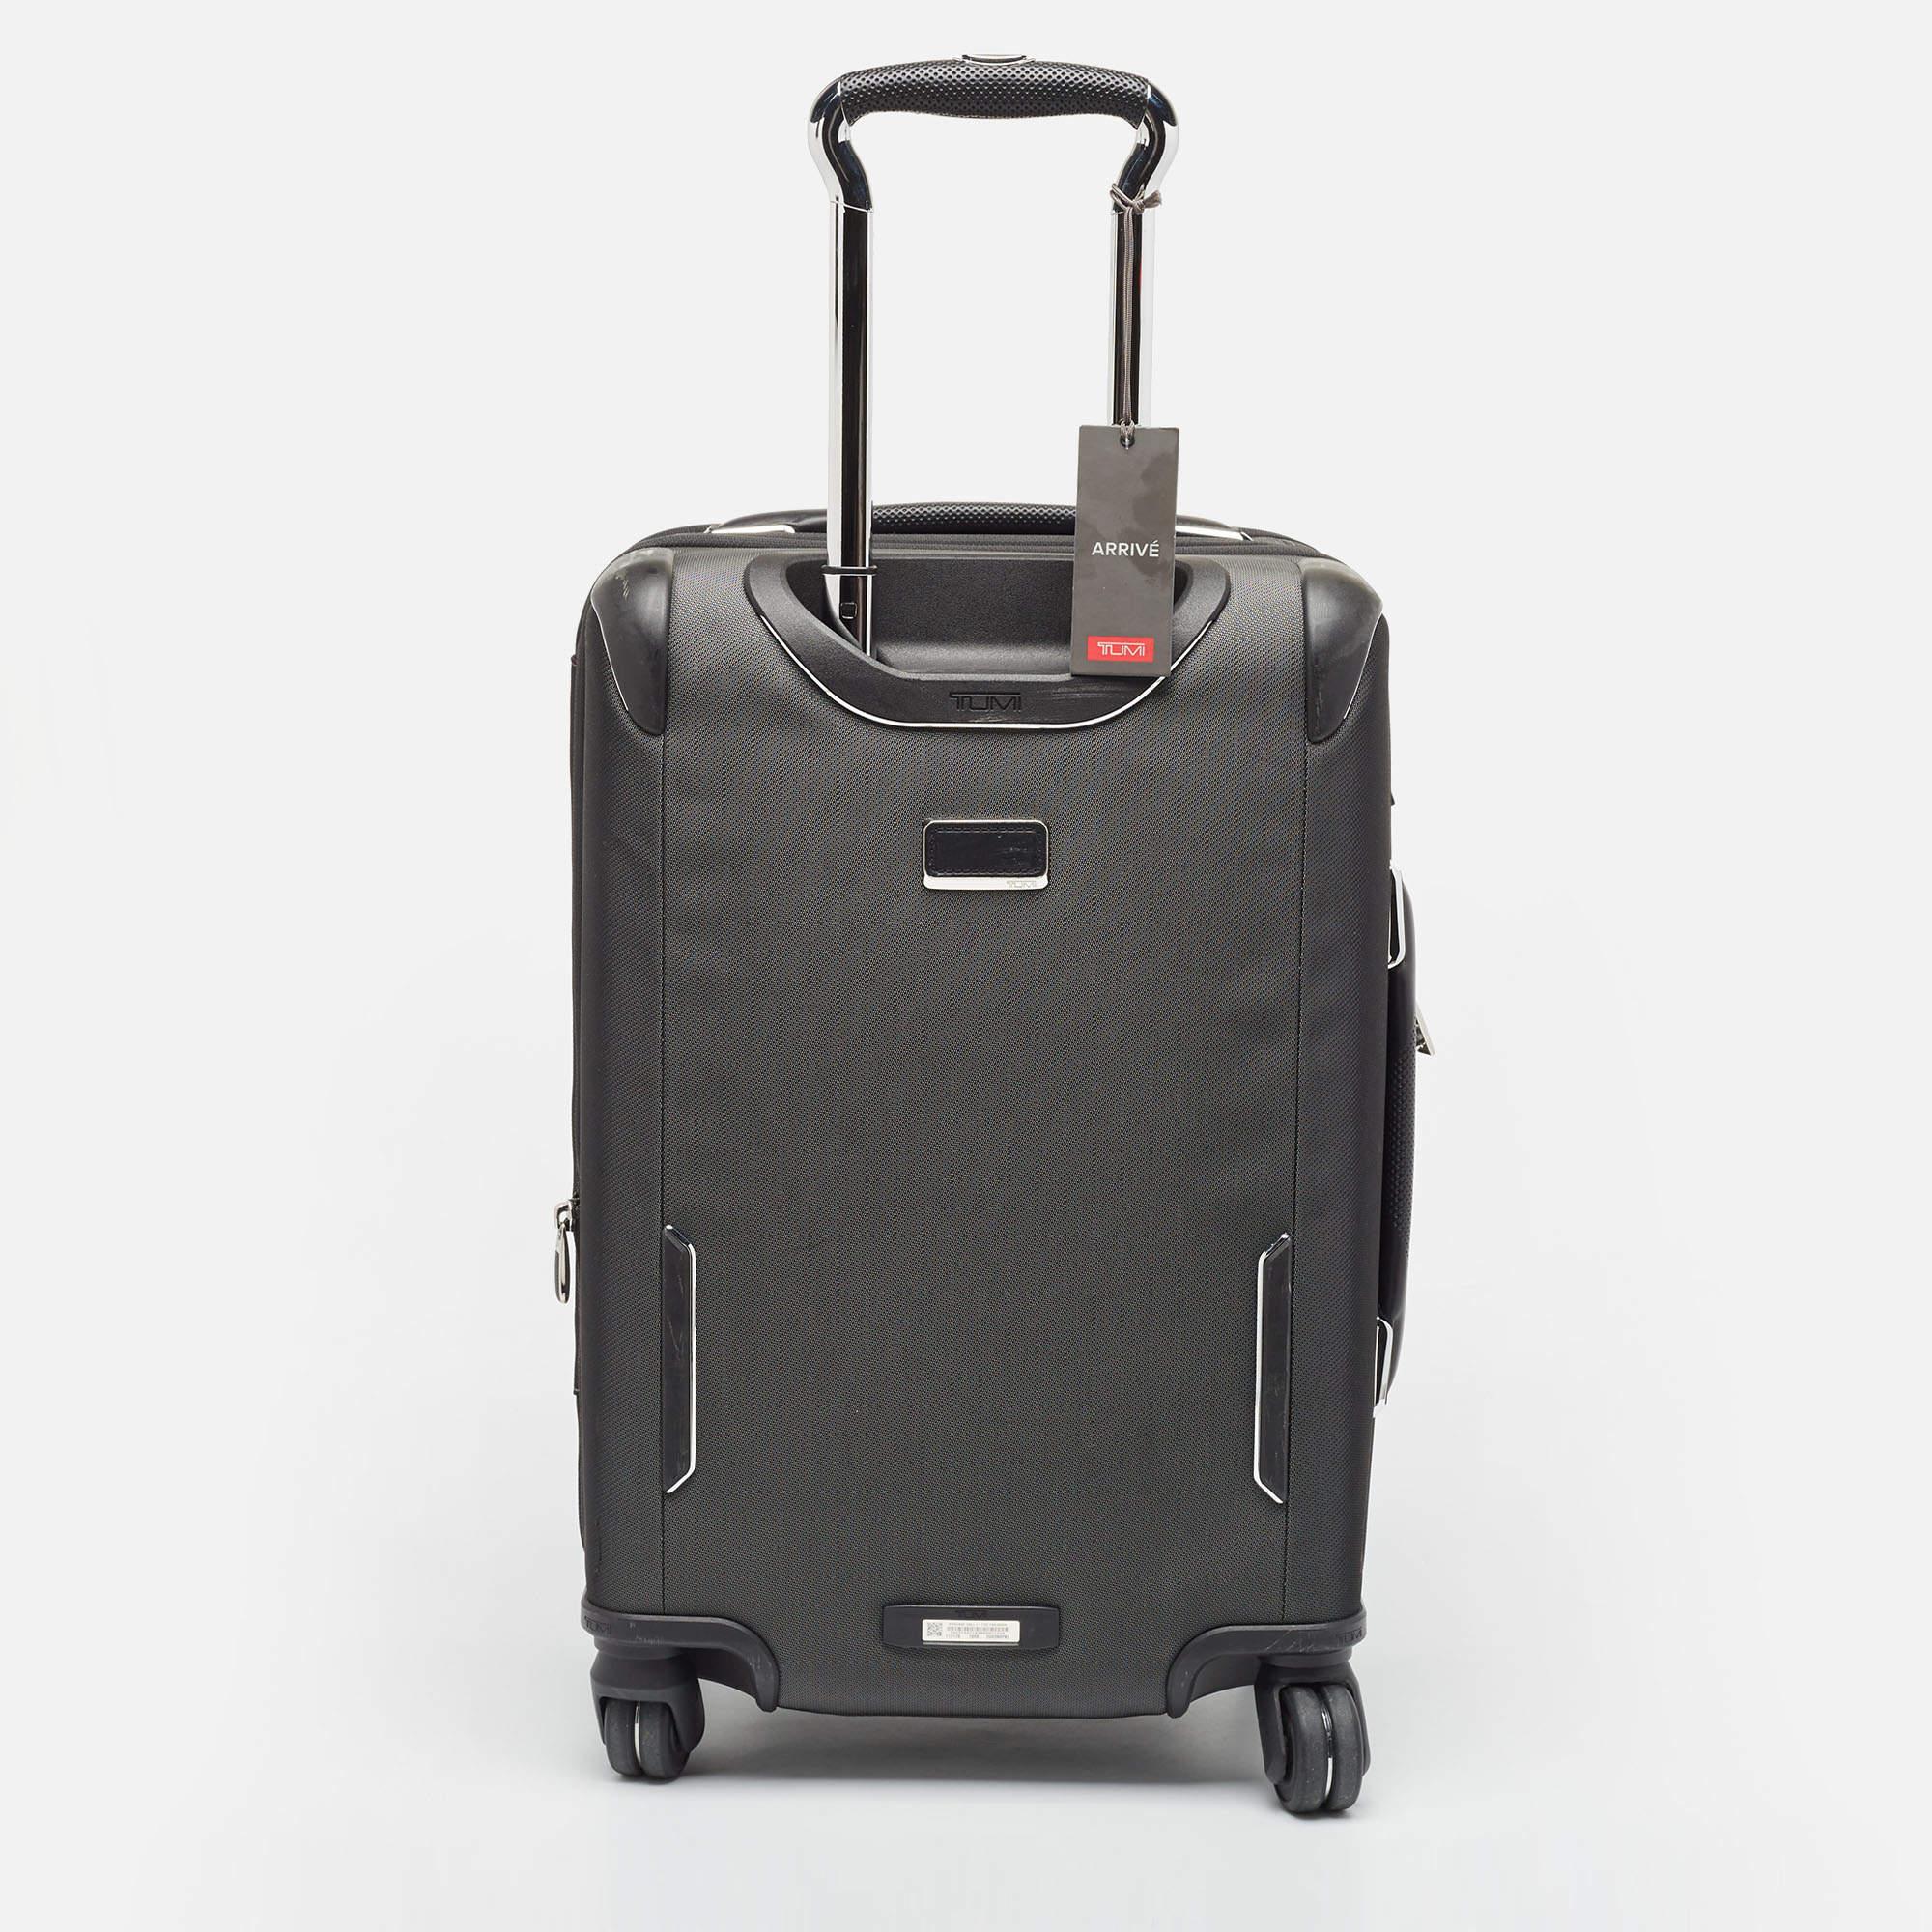 Travel to all the places you wish to, with ease, using this designer suitcase. It is a result of employing high-grade materials and meticulous construction to deliver impeccable products that aim at functional ease.

Includes: Tag, Info Card,